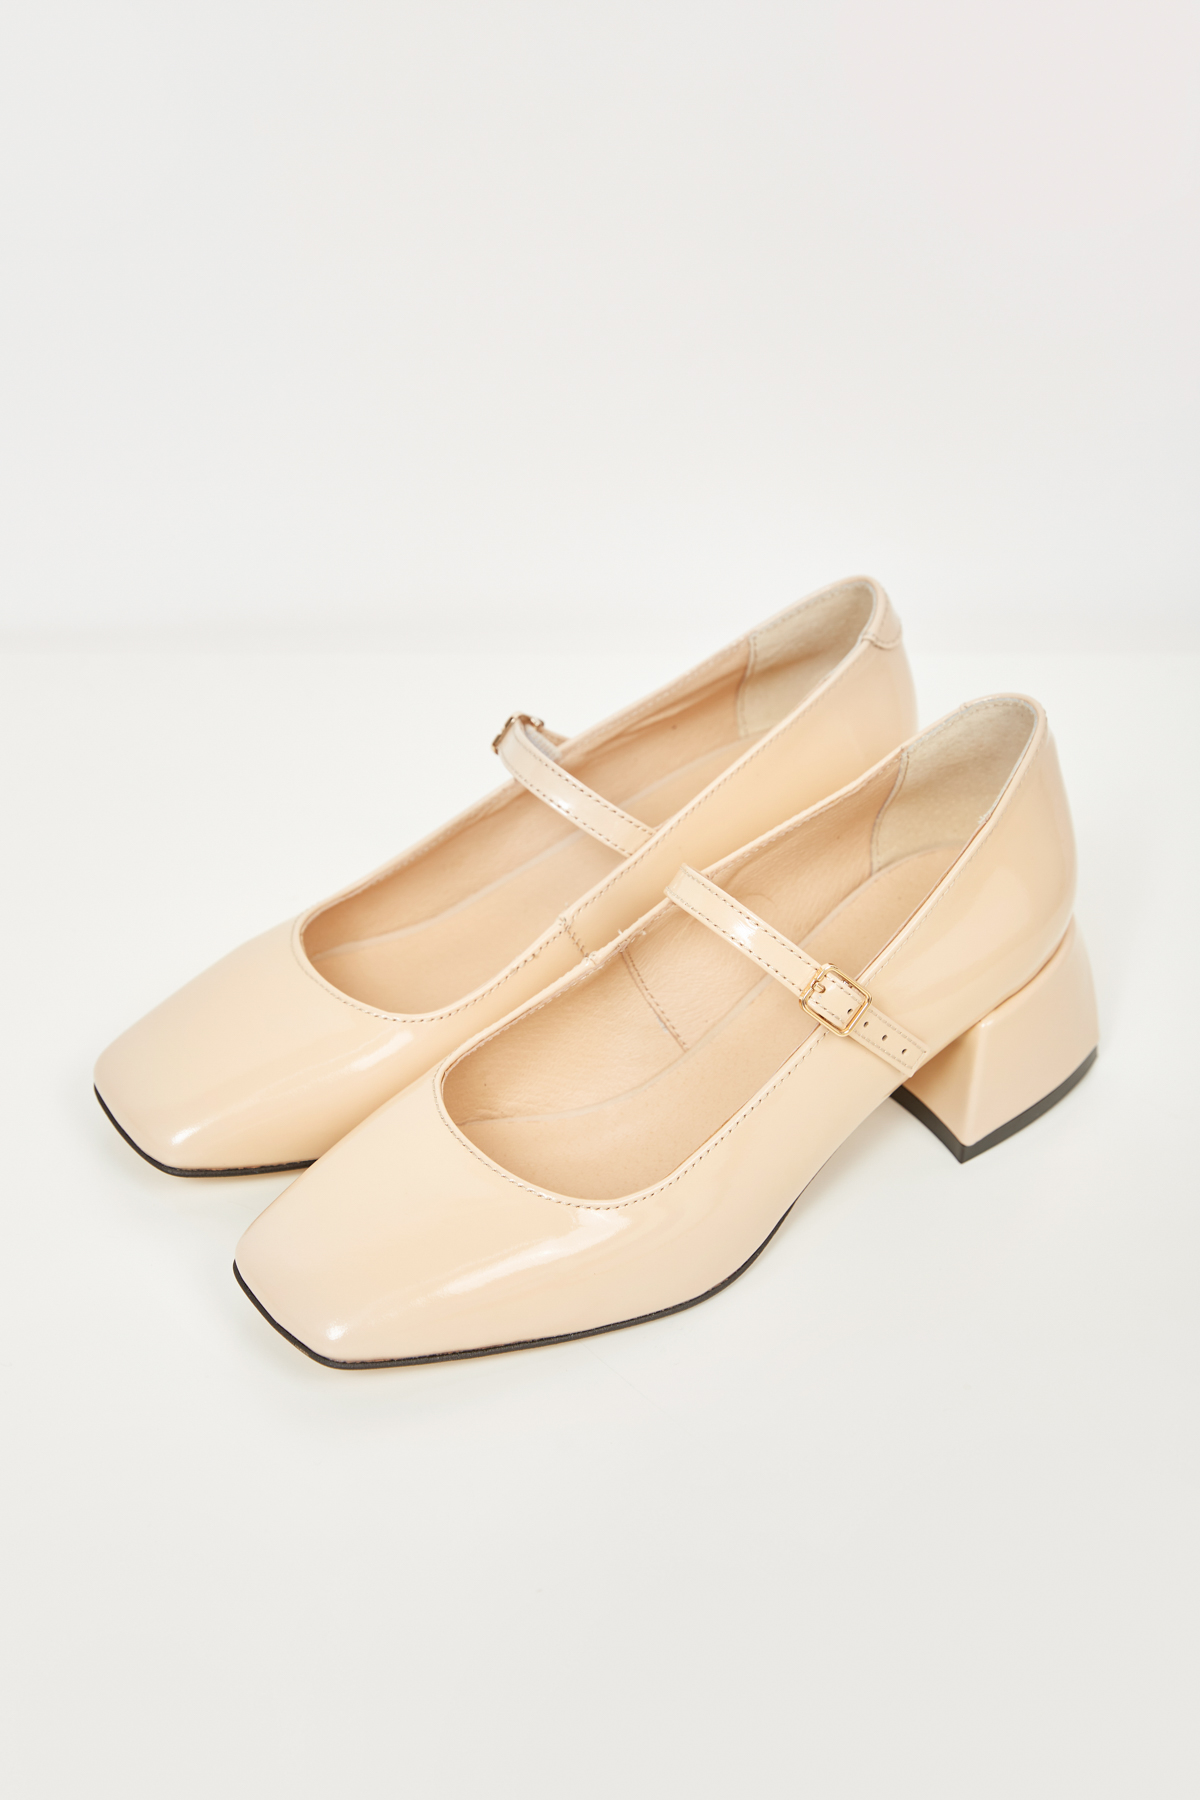 Beige patent leather shoes, photo 5